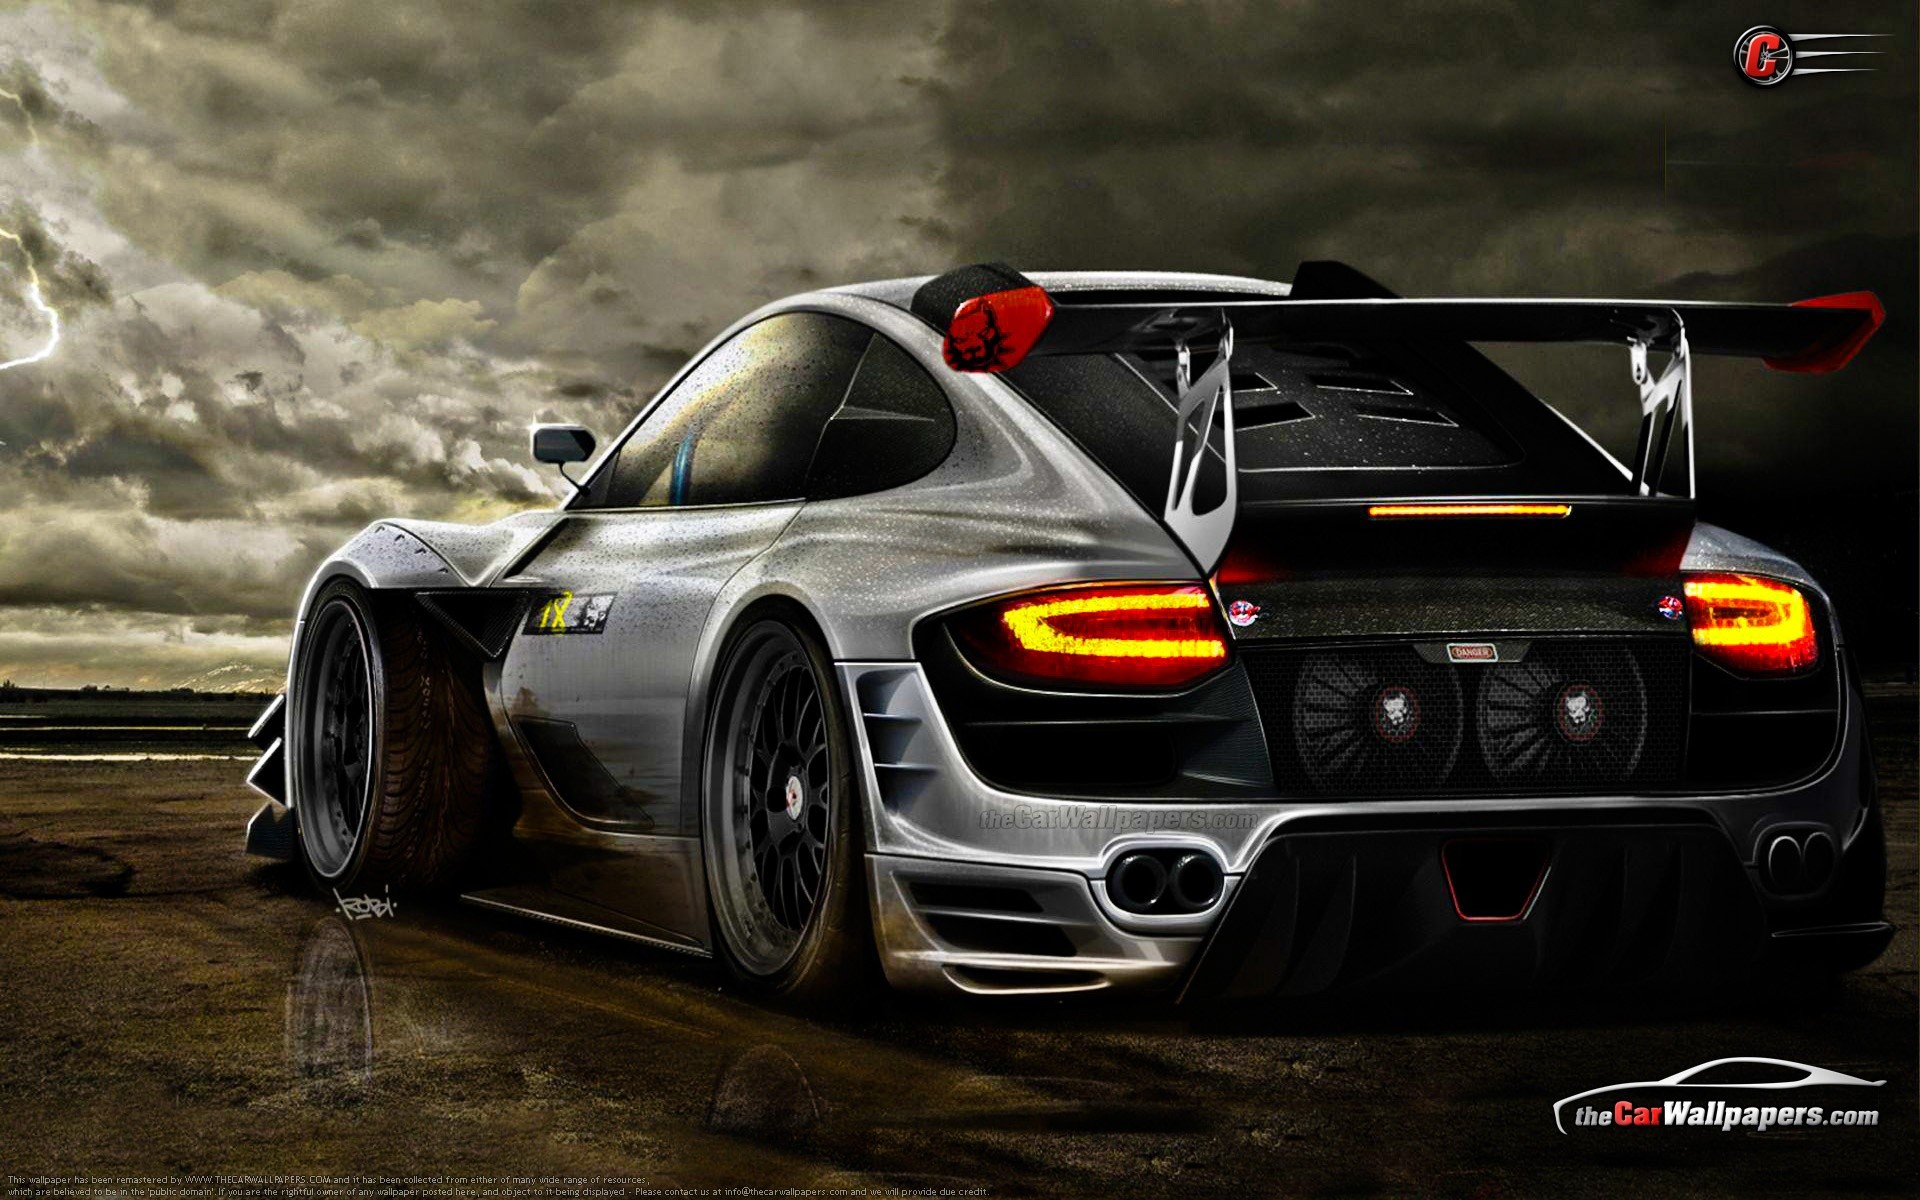 An awesome image of Porsche 911